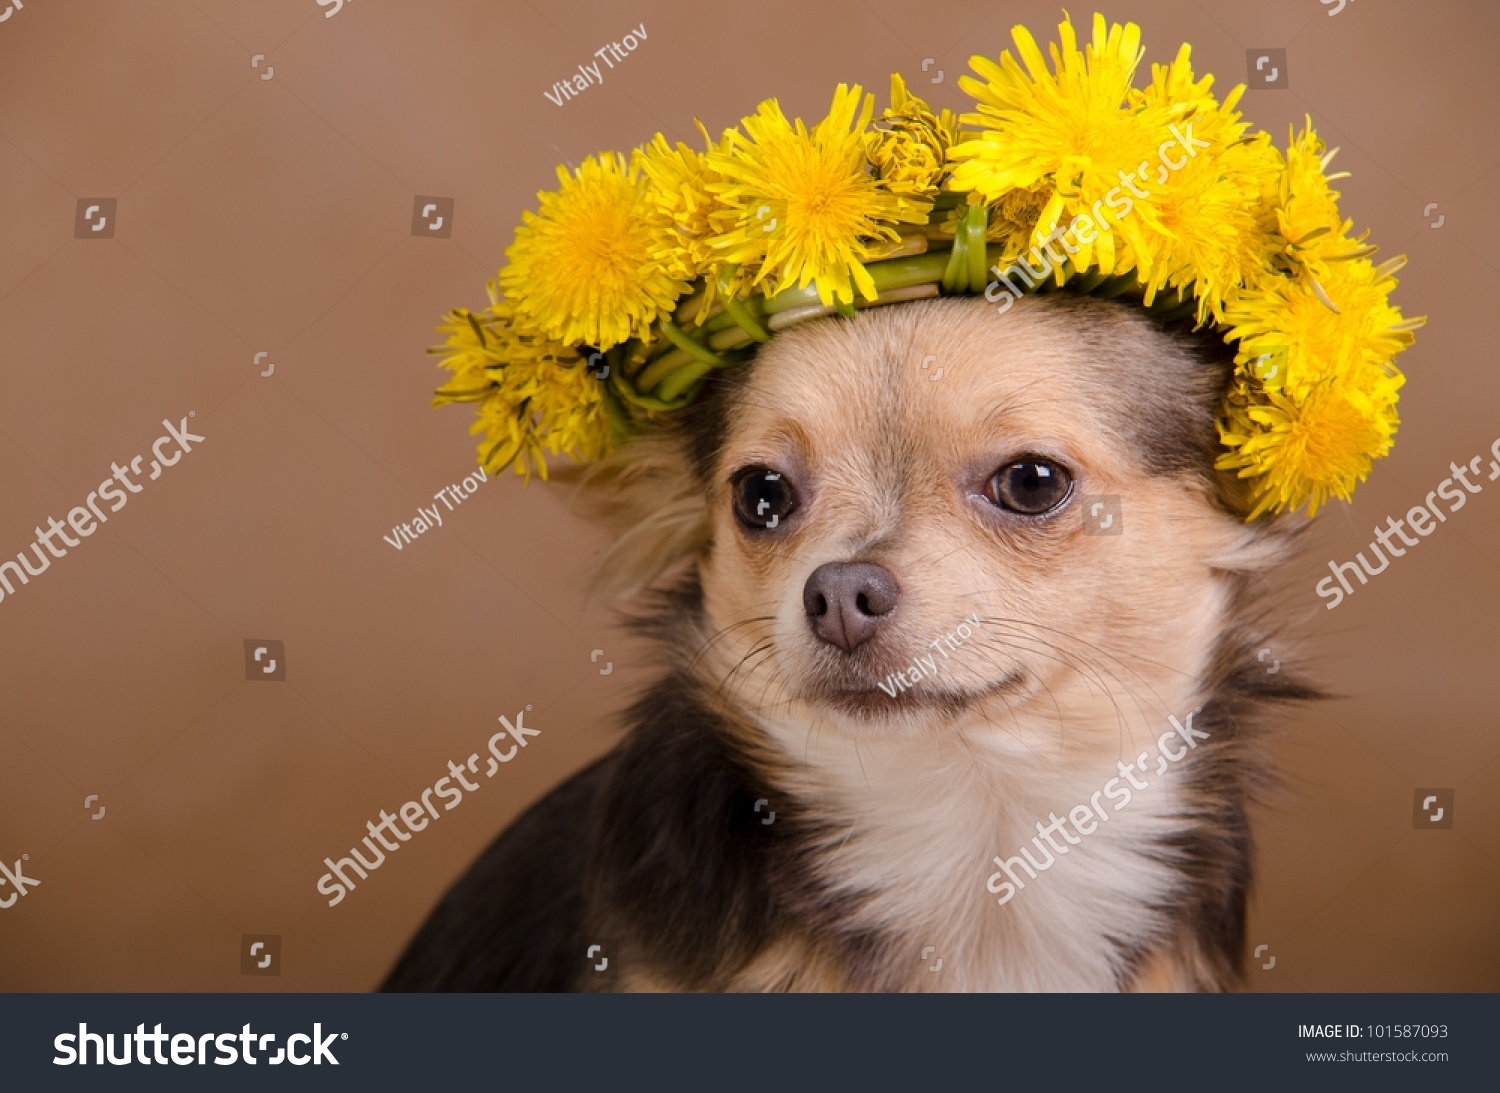 Chihuahua dog with wreath of dandelions #101587093